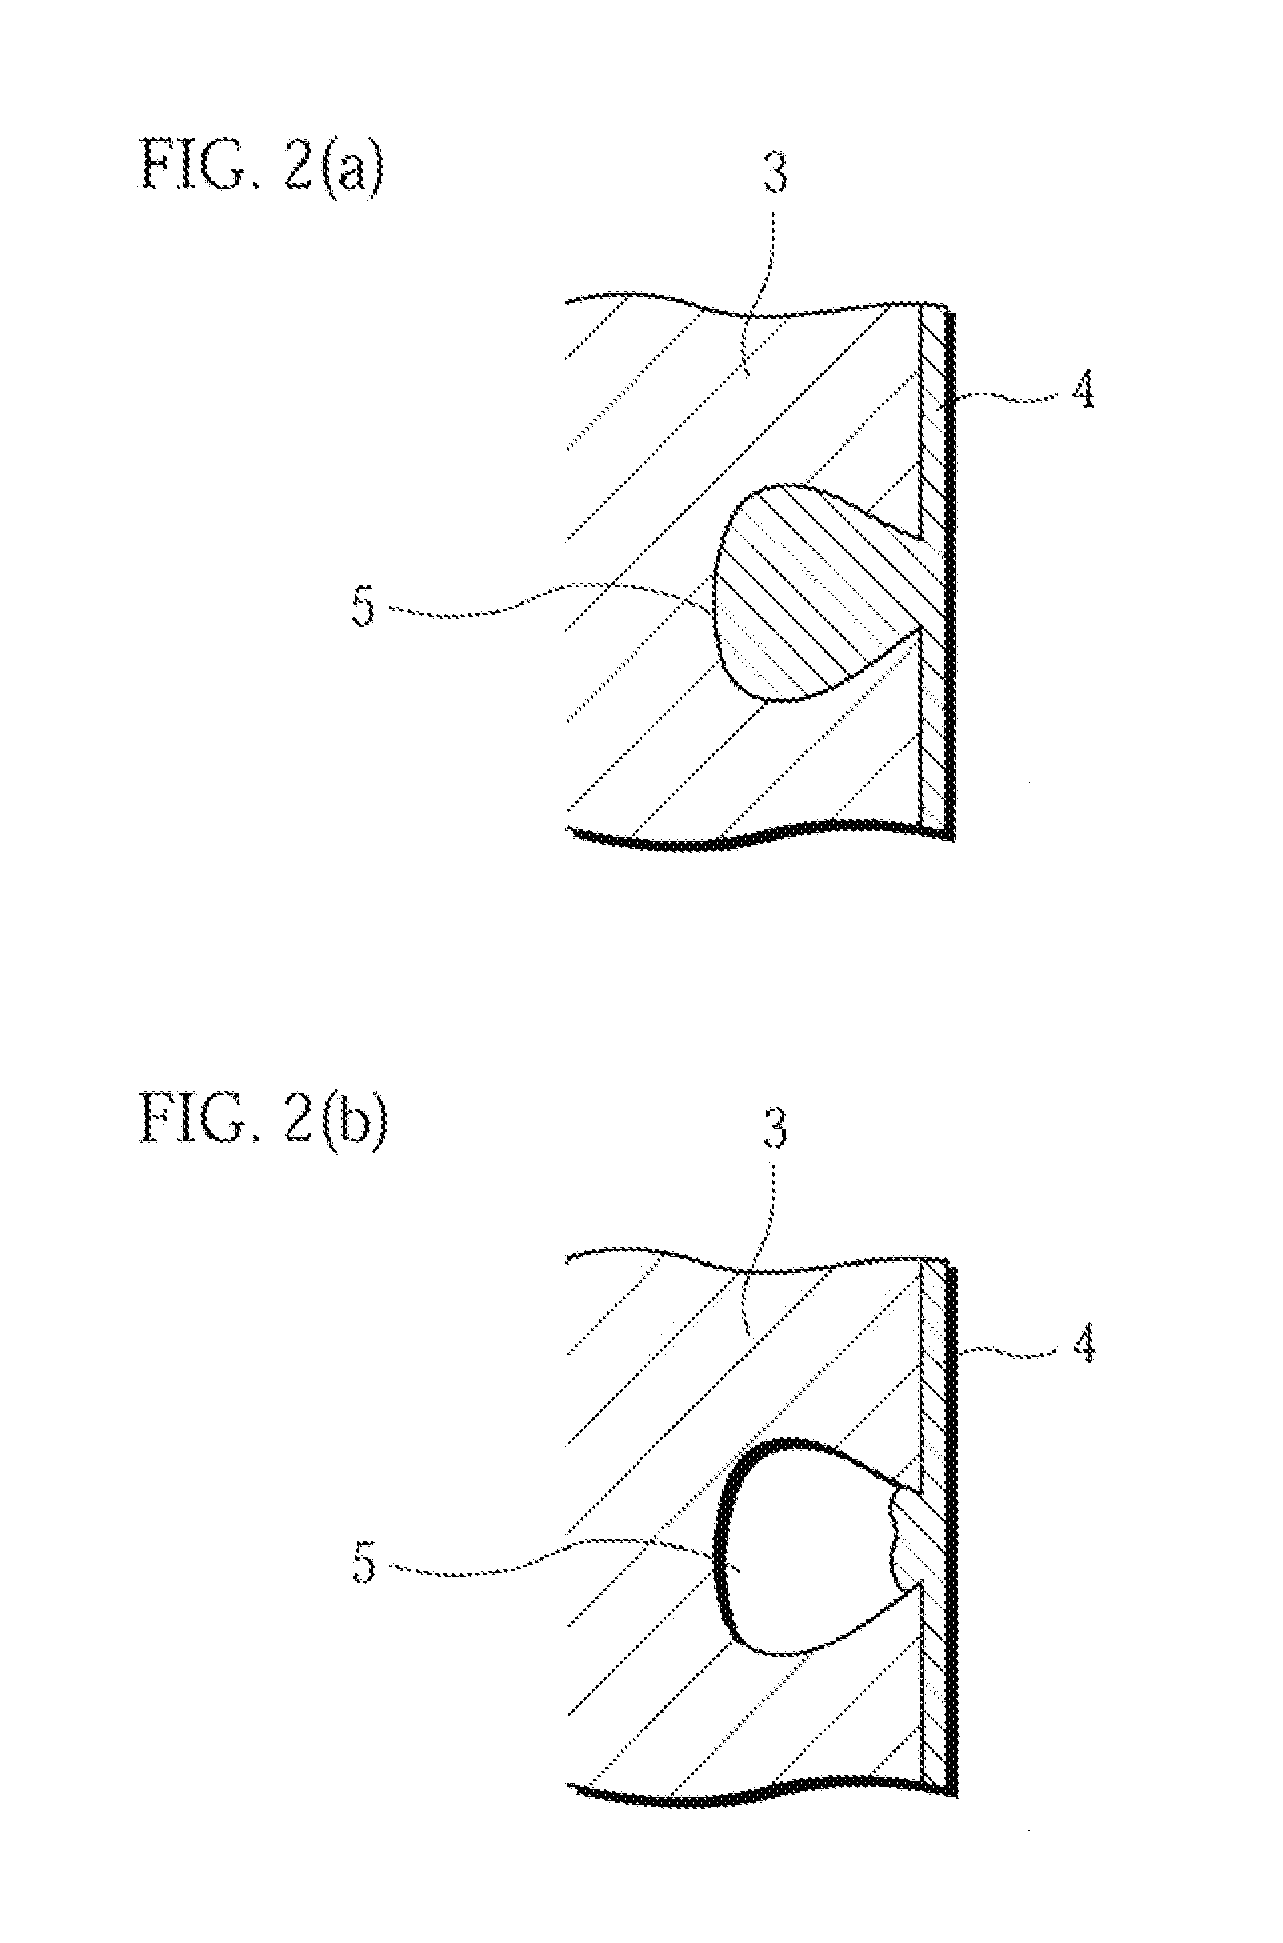 Graphite crucible for single crystal pulling apparatus and method of manufacturing same